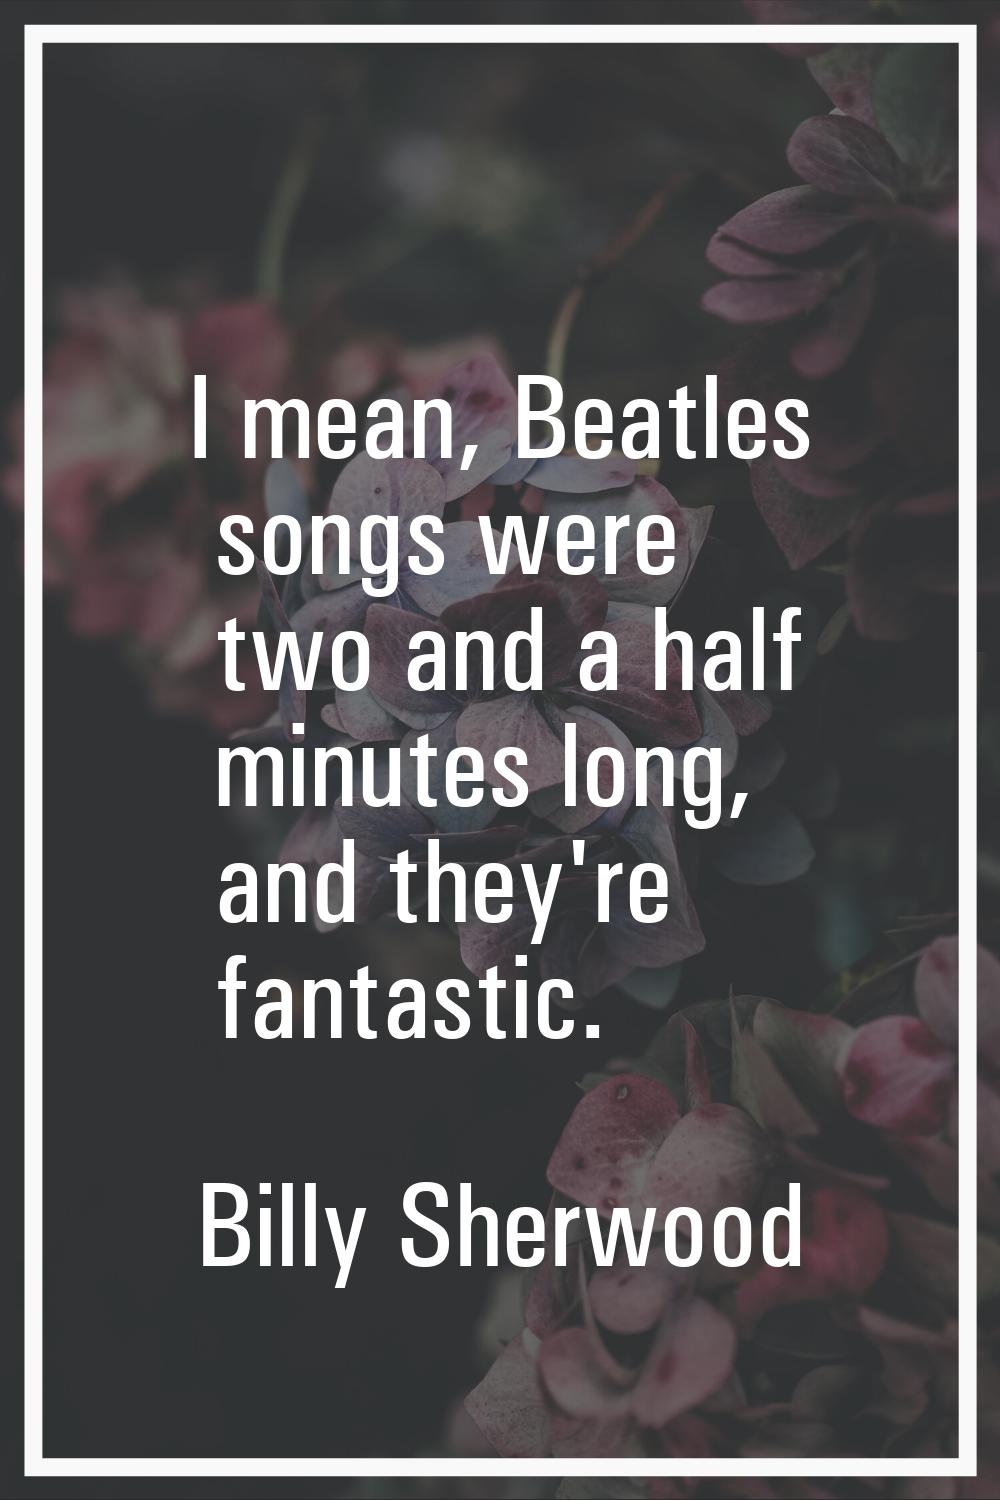 I mean, Beatles songs were two and a half minutes long, and they're fantastic.